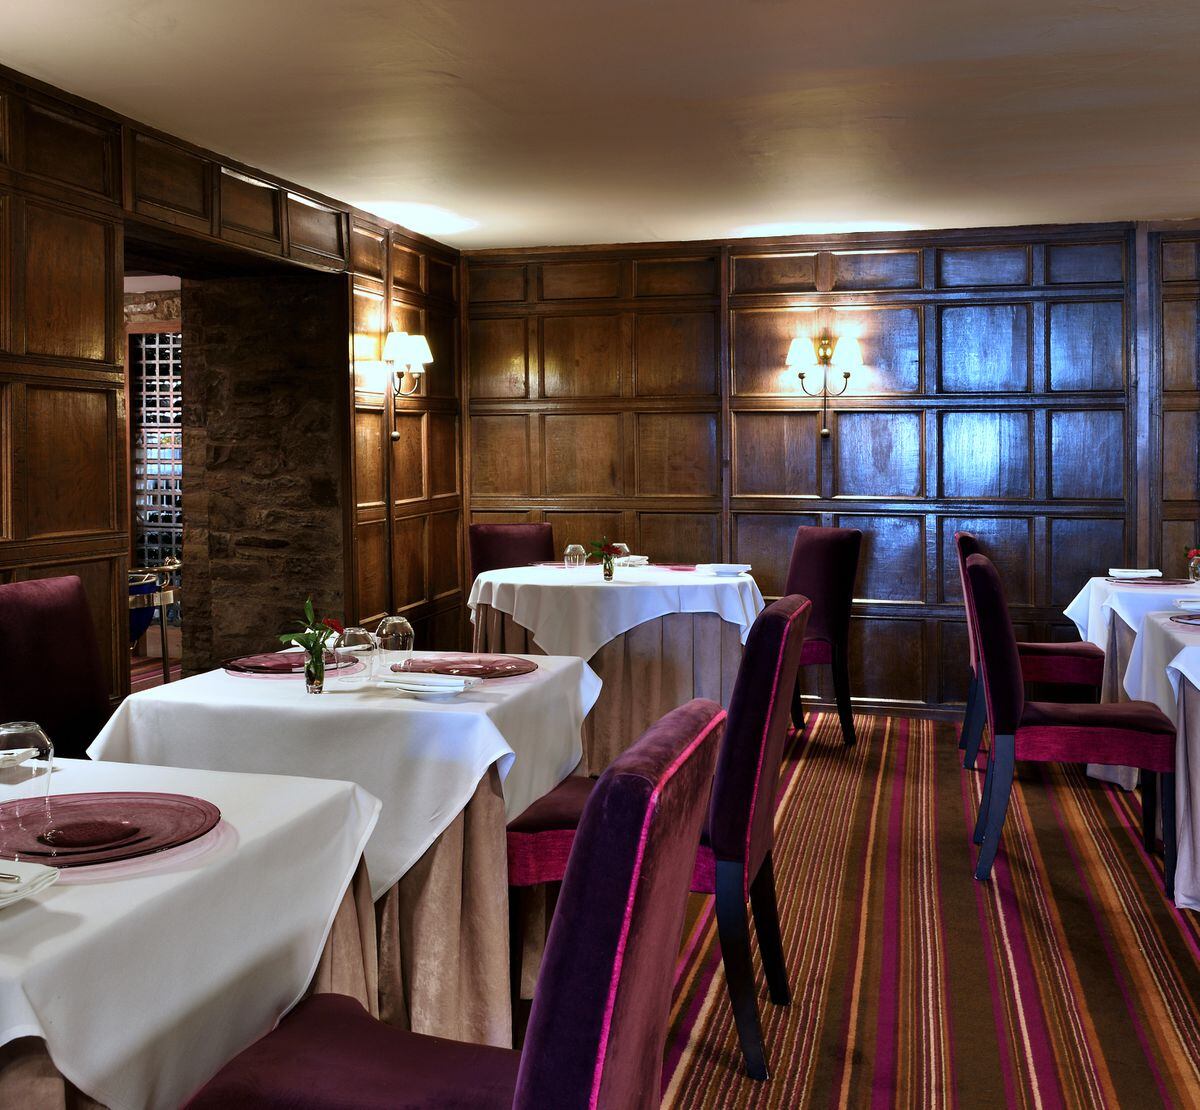  The beautiful oak-panelled dining room